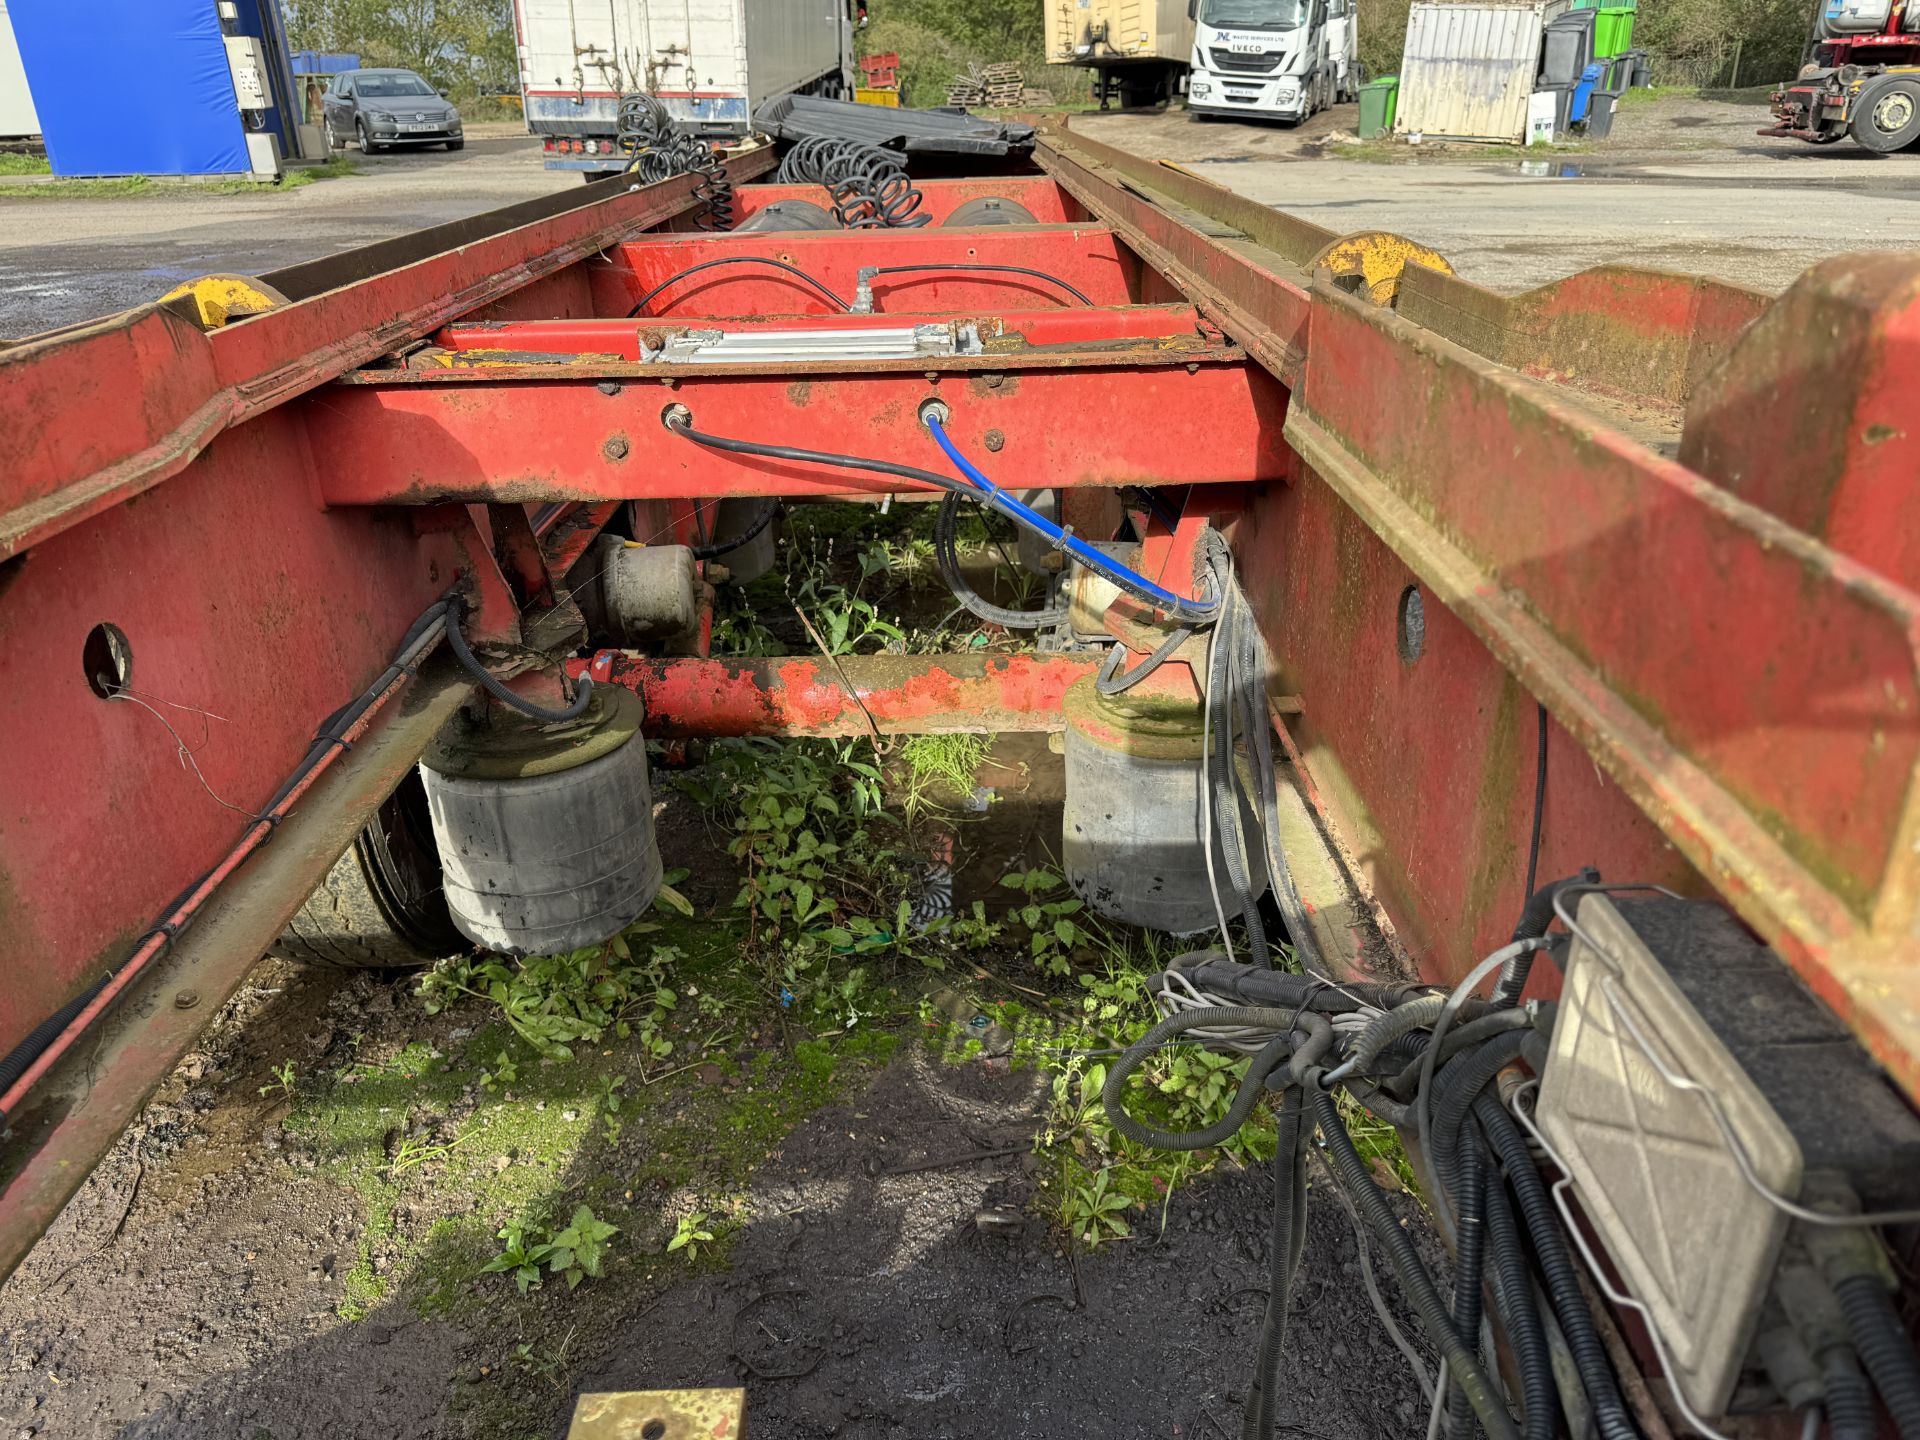 JNL 03 - The Boughton Tri - Axle Trailer, Sold for Spares - Image 12 of 12